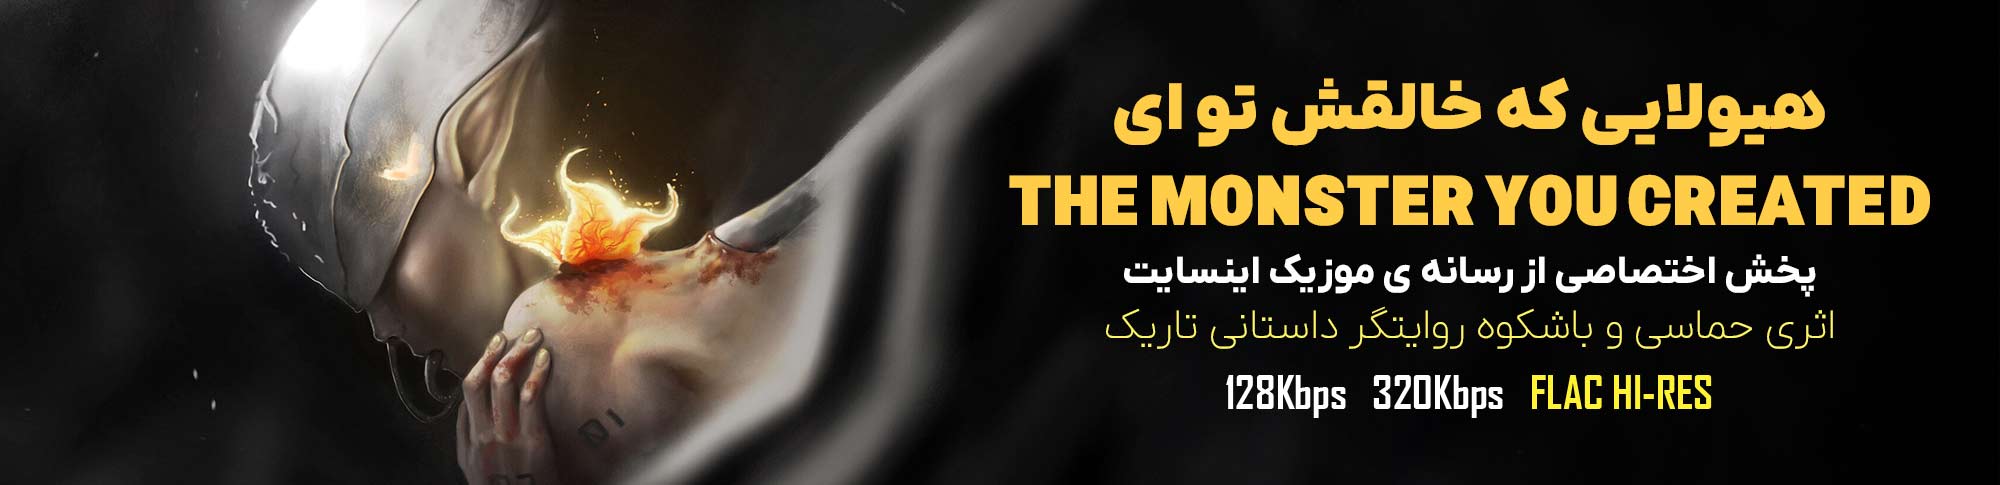 Mohsen iLAT - The Monster You Created